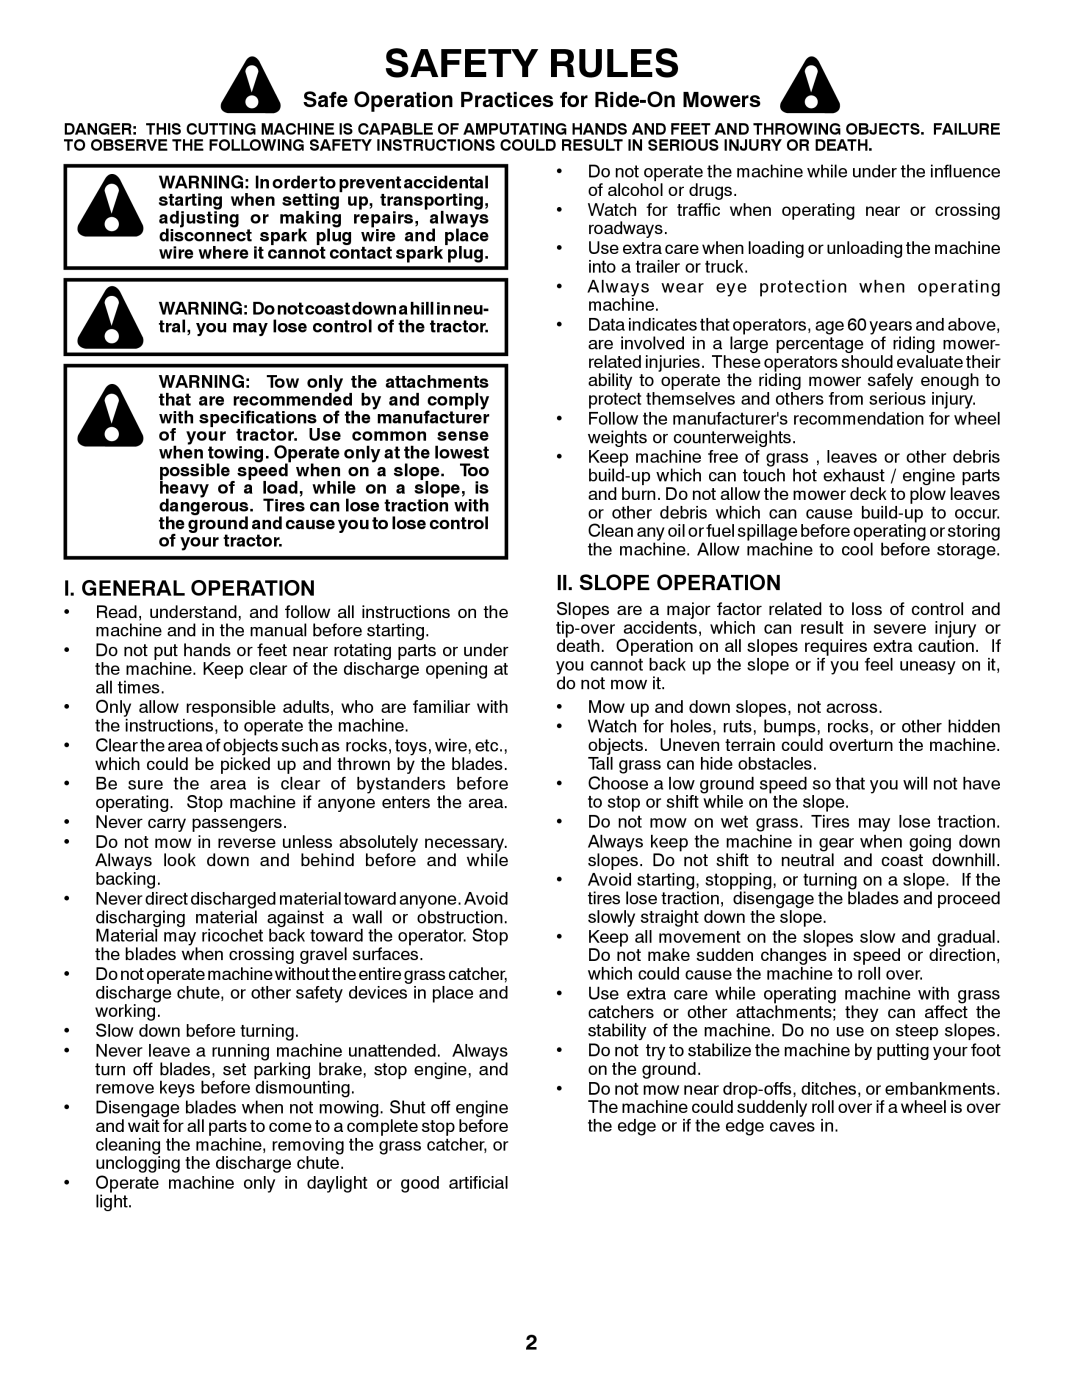 McCulloch 96041018000 Safety Rules, Safe Operation Practices for Ride-On Mowers, I. General Operation, Ii. Slope Operation 